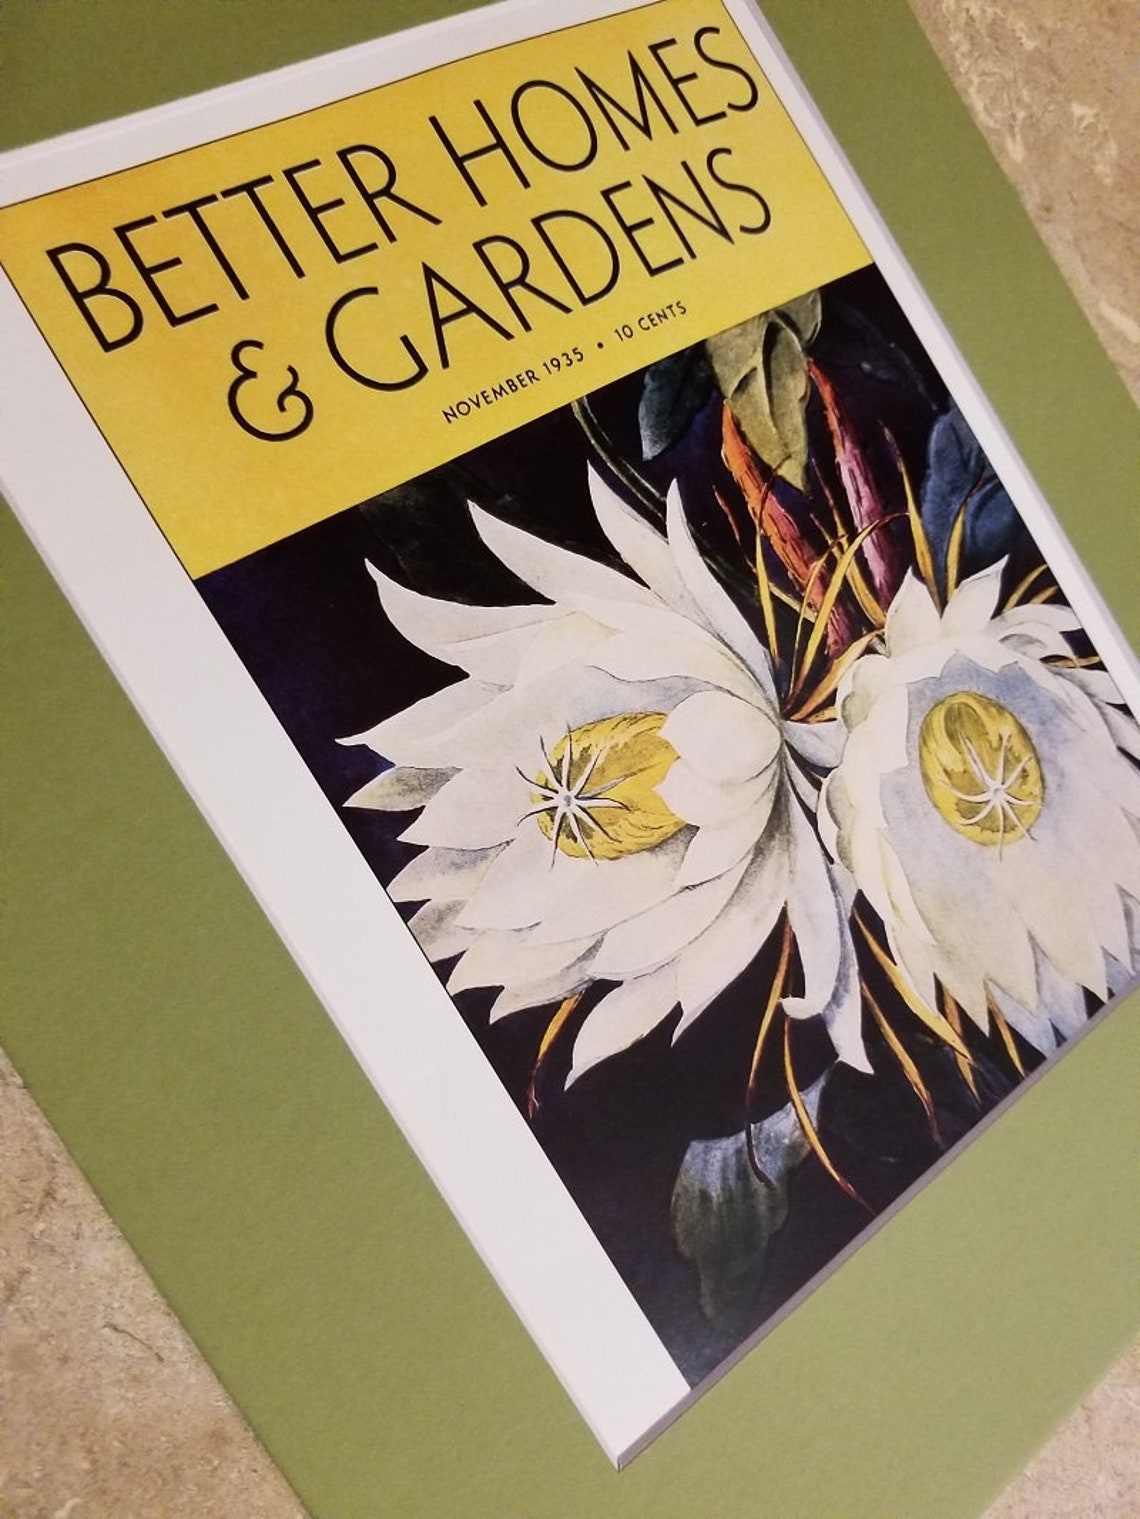 BETTER HOMES & GARDENS calendar prints matted in acid free | Etsy